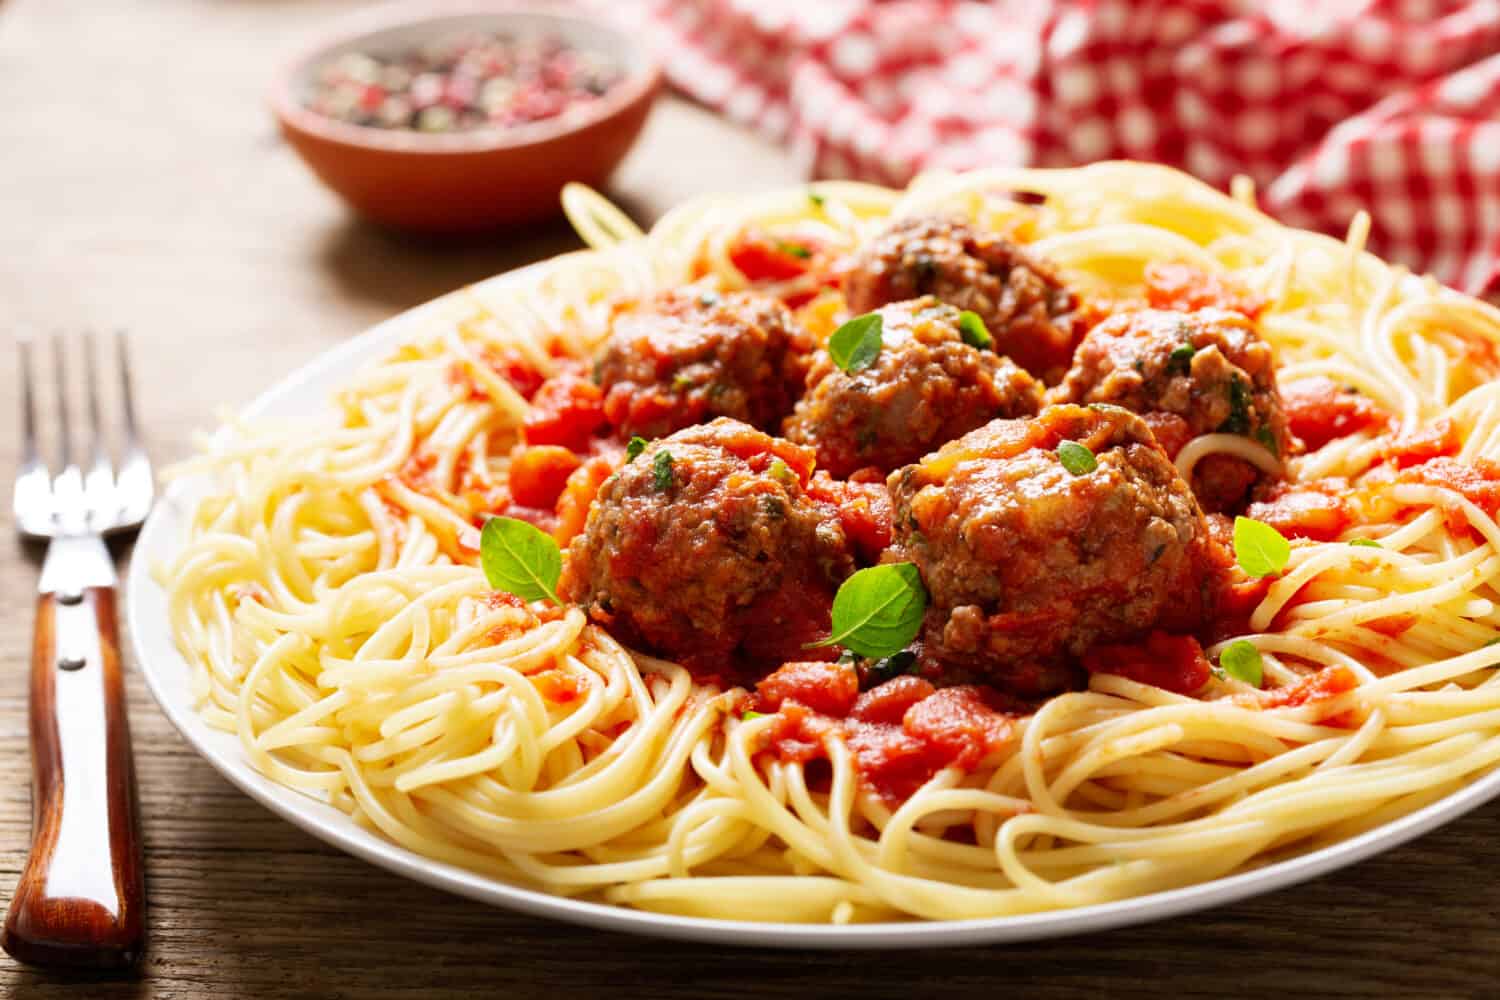 plate of pasta with meatballs on a wooden table